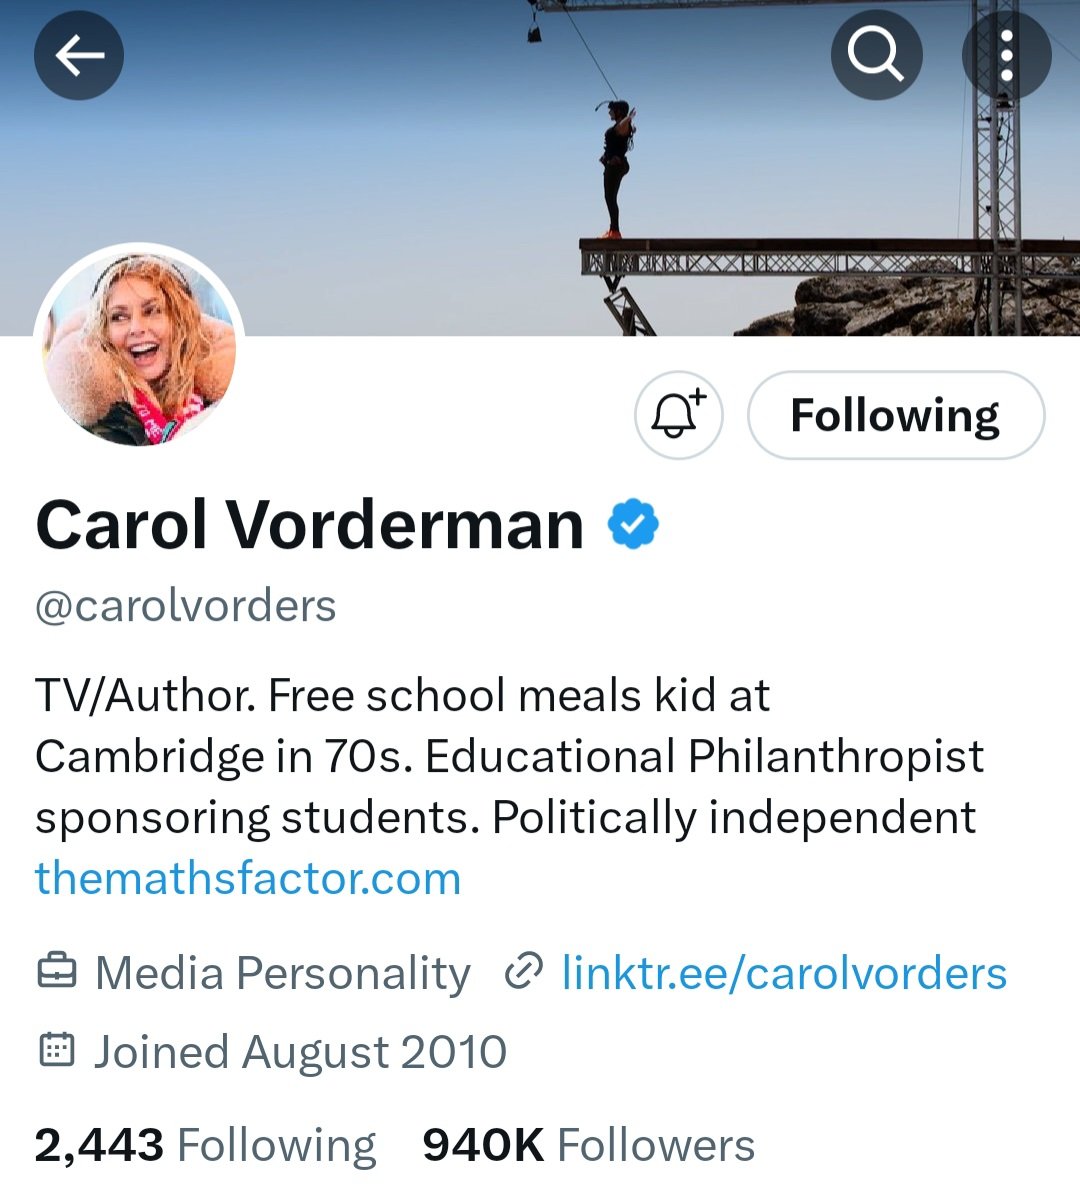 Let's get @carolvorders to 1M+ followers. Please Like and Retweet.